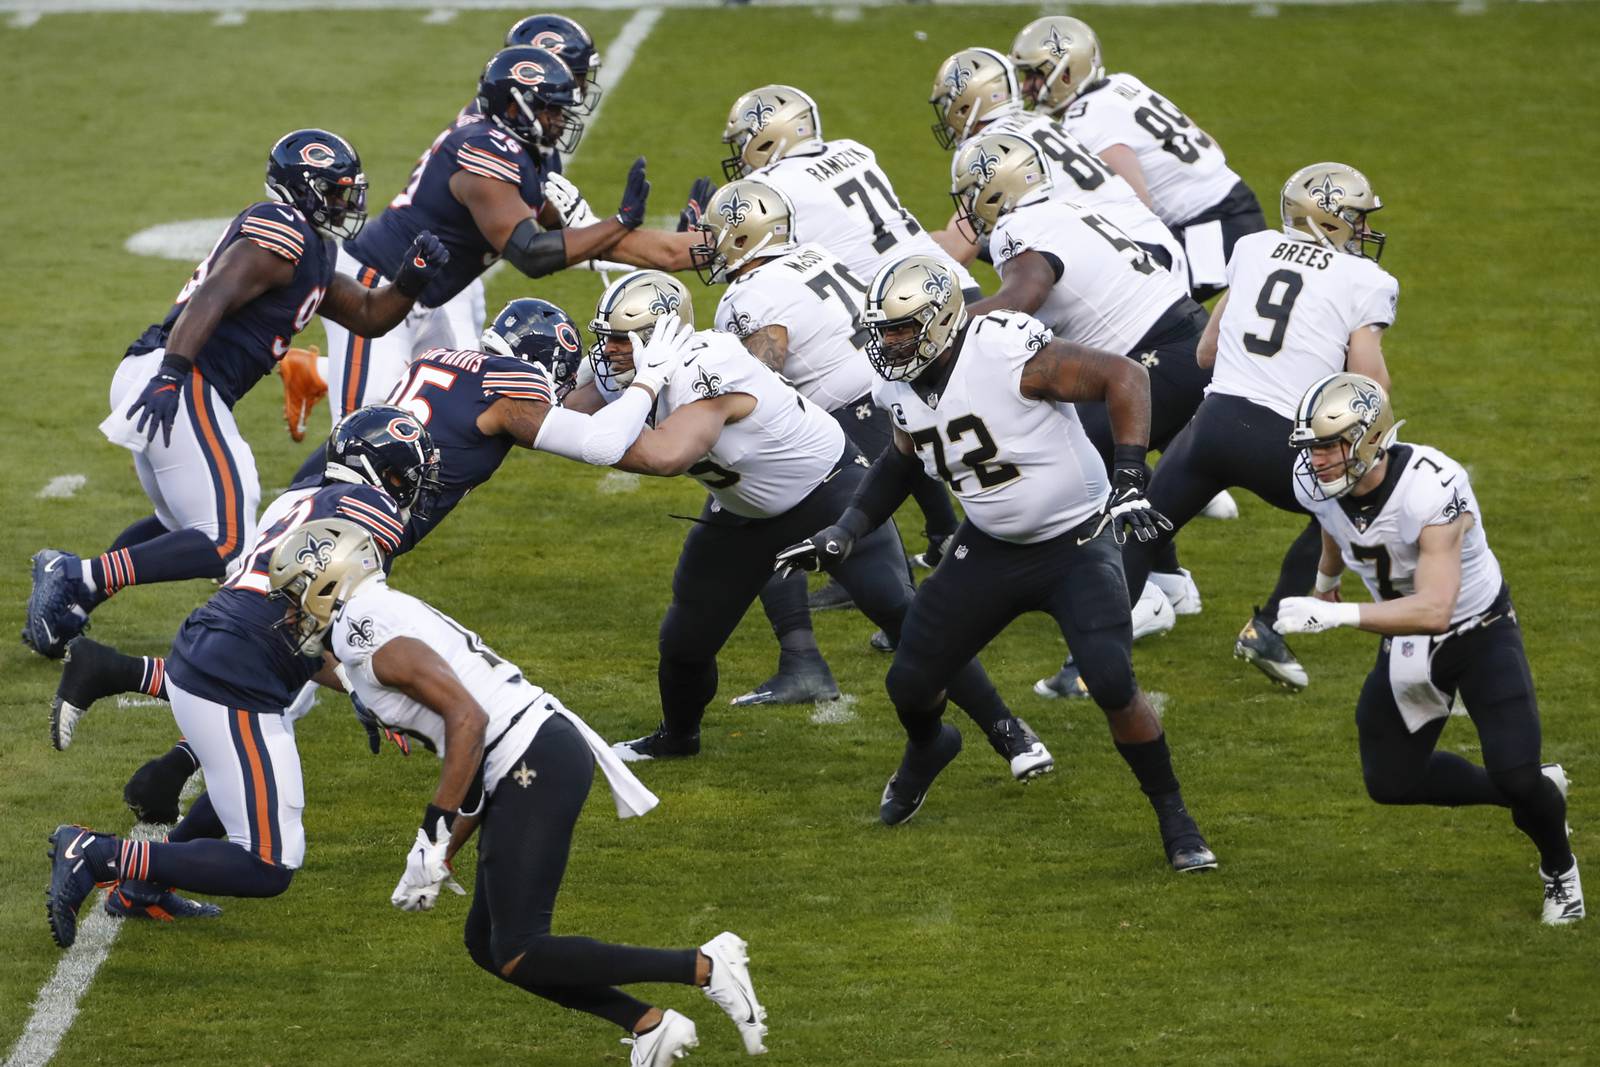 Bears vs. Saints live updates from the Wild Card playoff game Shaw Local